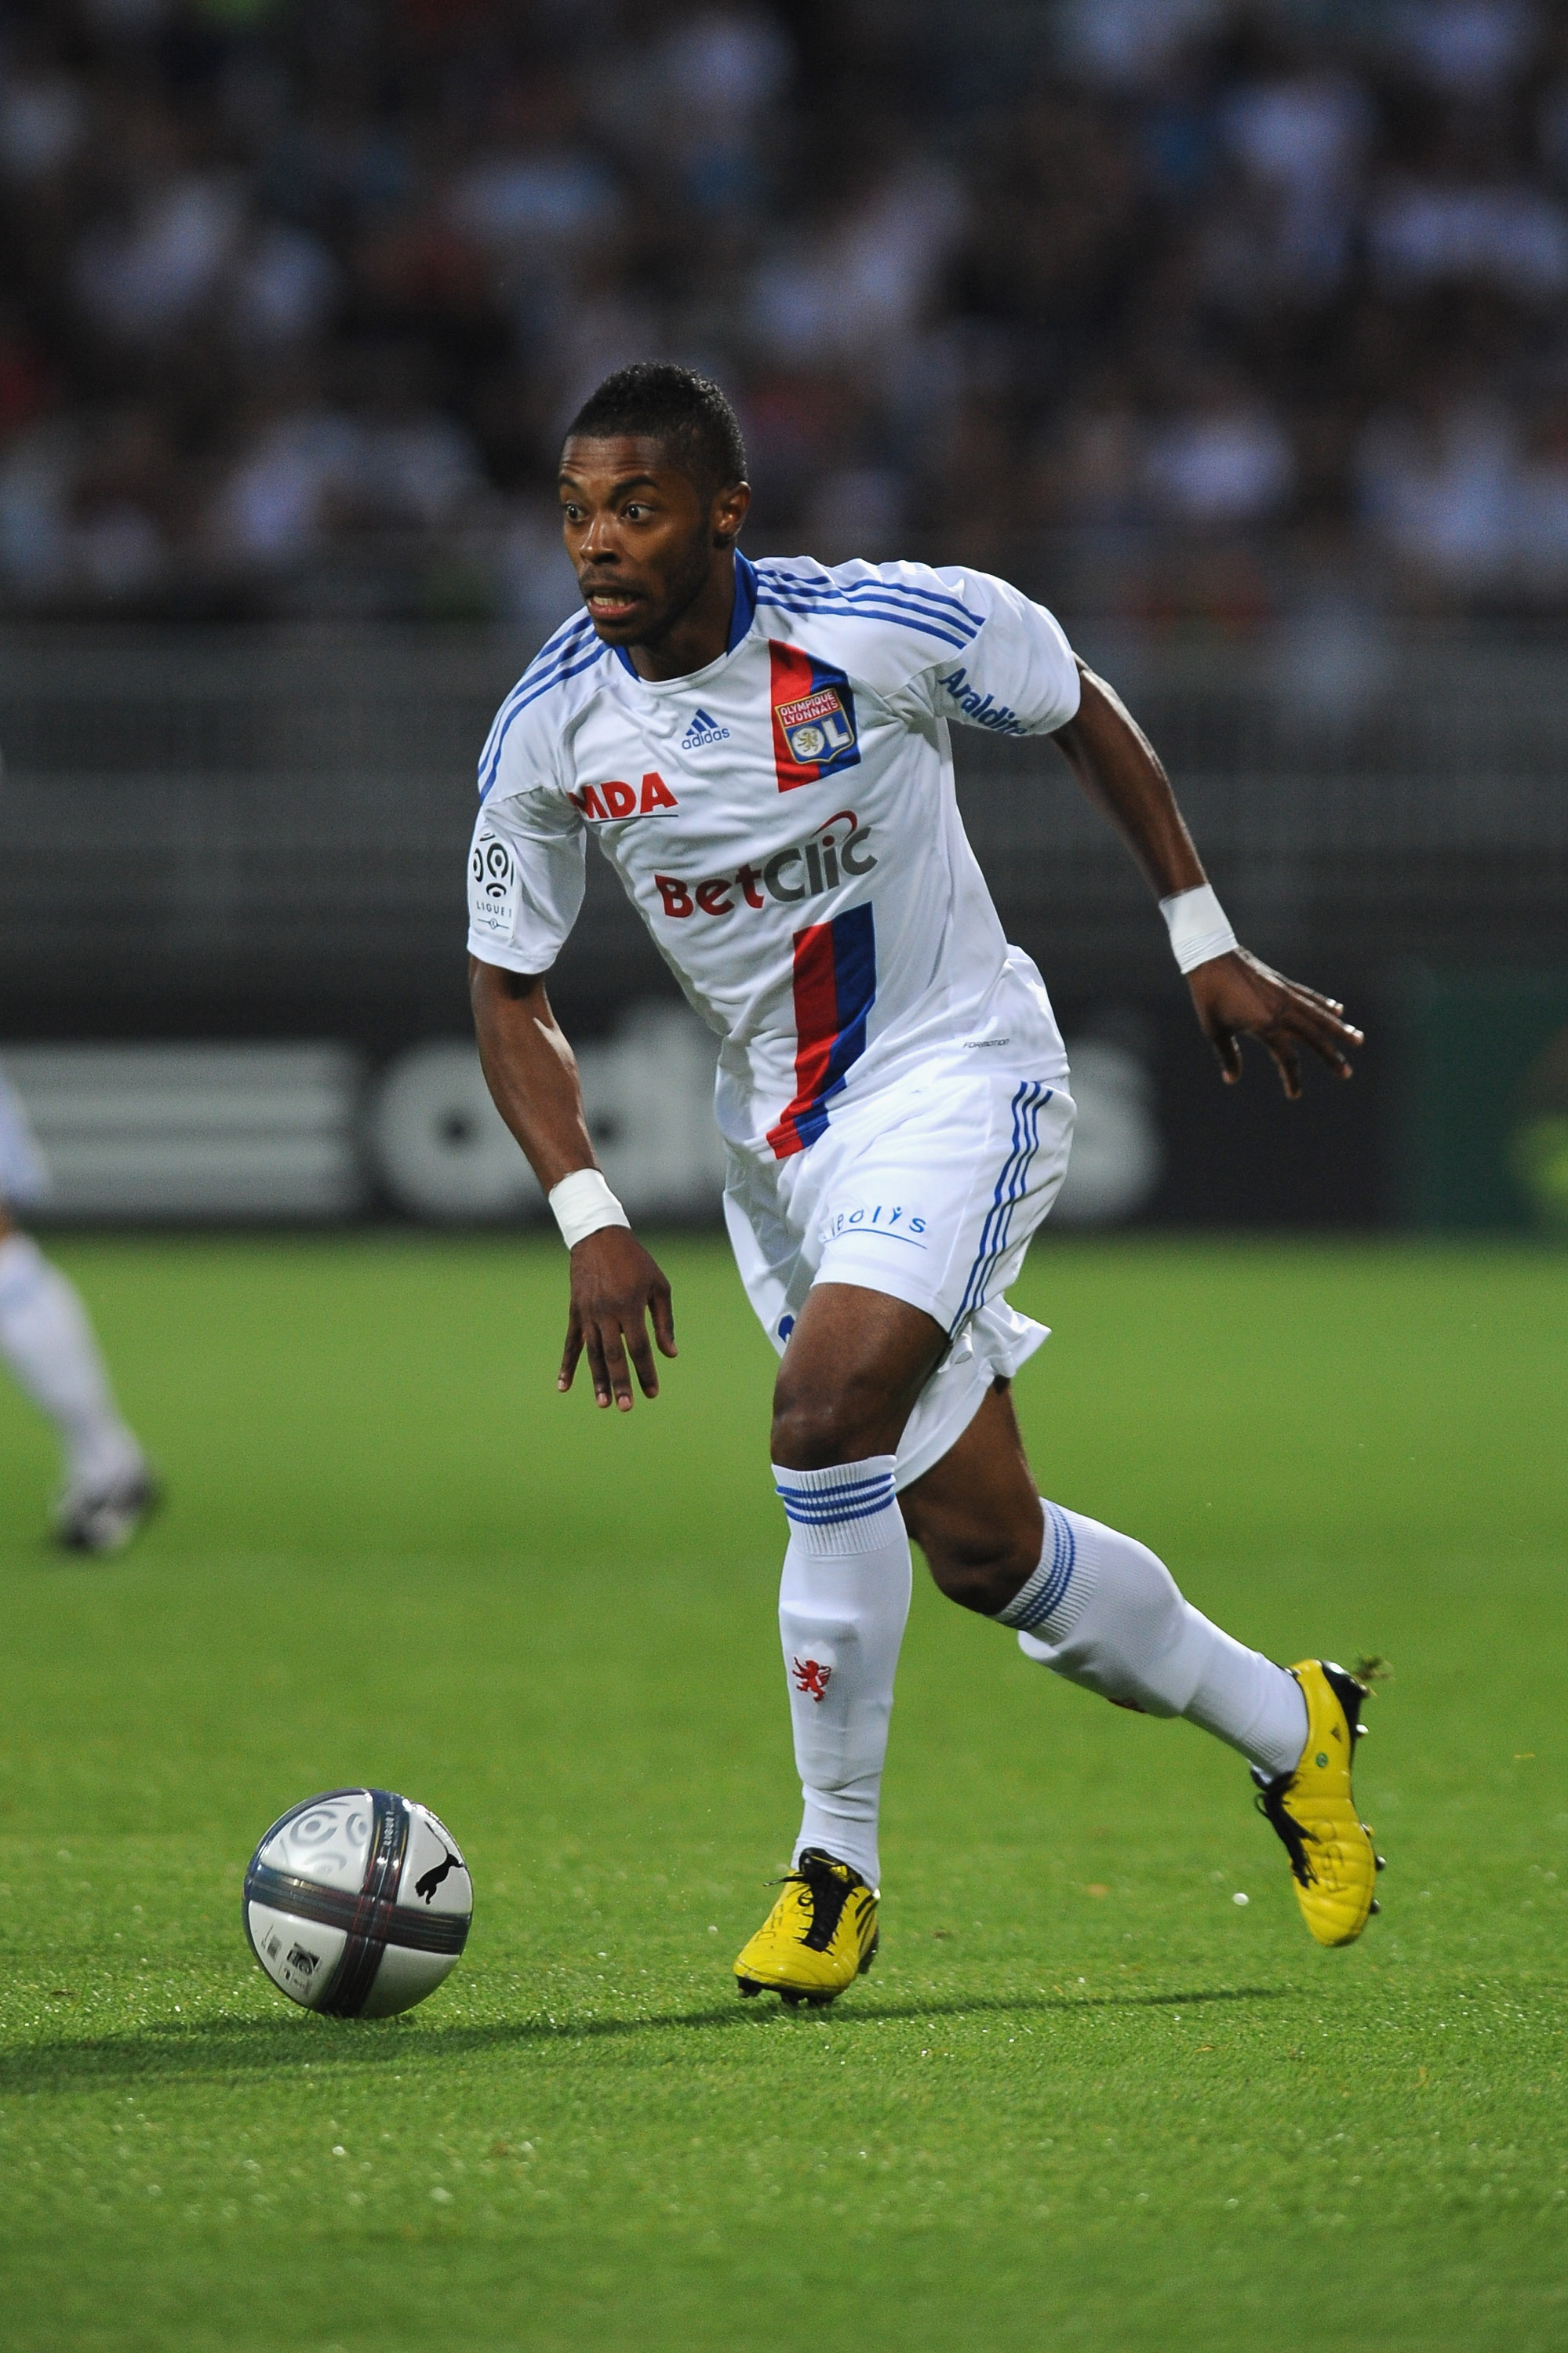 LYON, FRANCE - AUGUST 07:  Michel Fernandes Bastos of Olympique Lyonnais in action during the Ligue 1 match between Olympique Lyonnais and AS Monaco FC at Gerland Stadium on August 7, 2010 in Lyon, France.  (Photo by Valerio Pennicino/Getty Images)